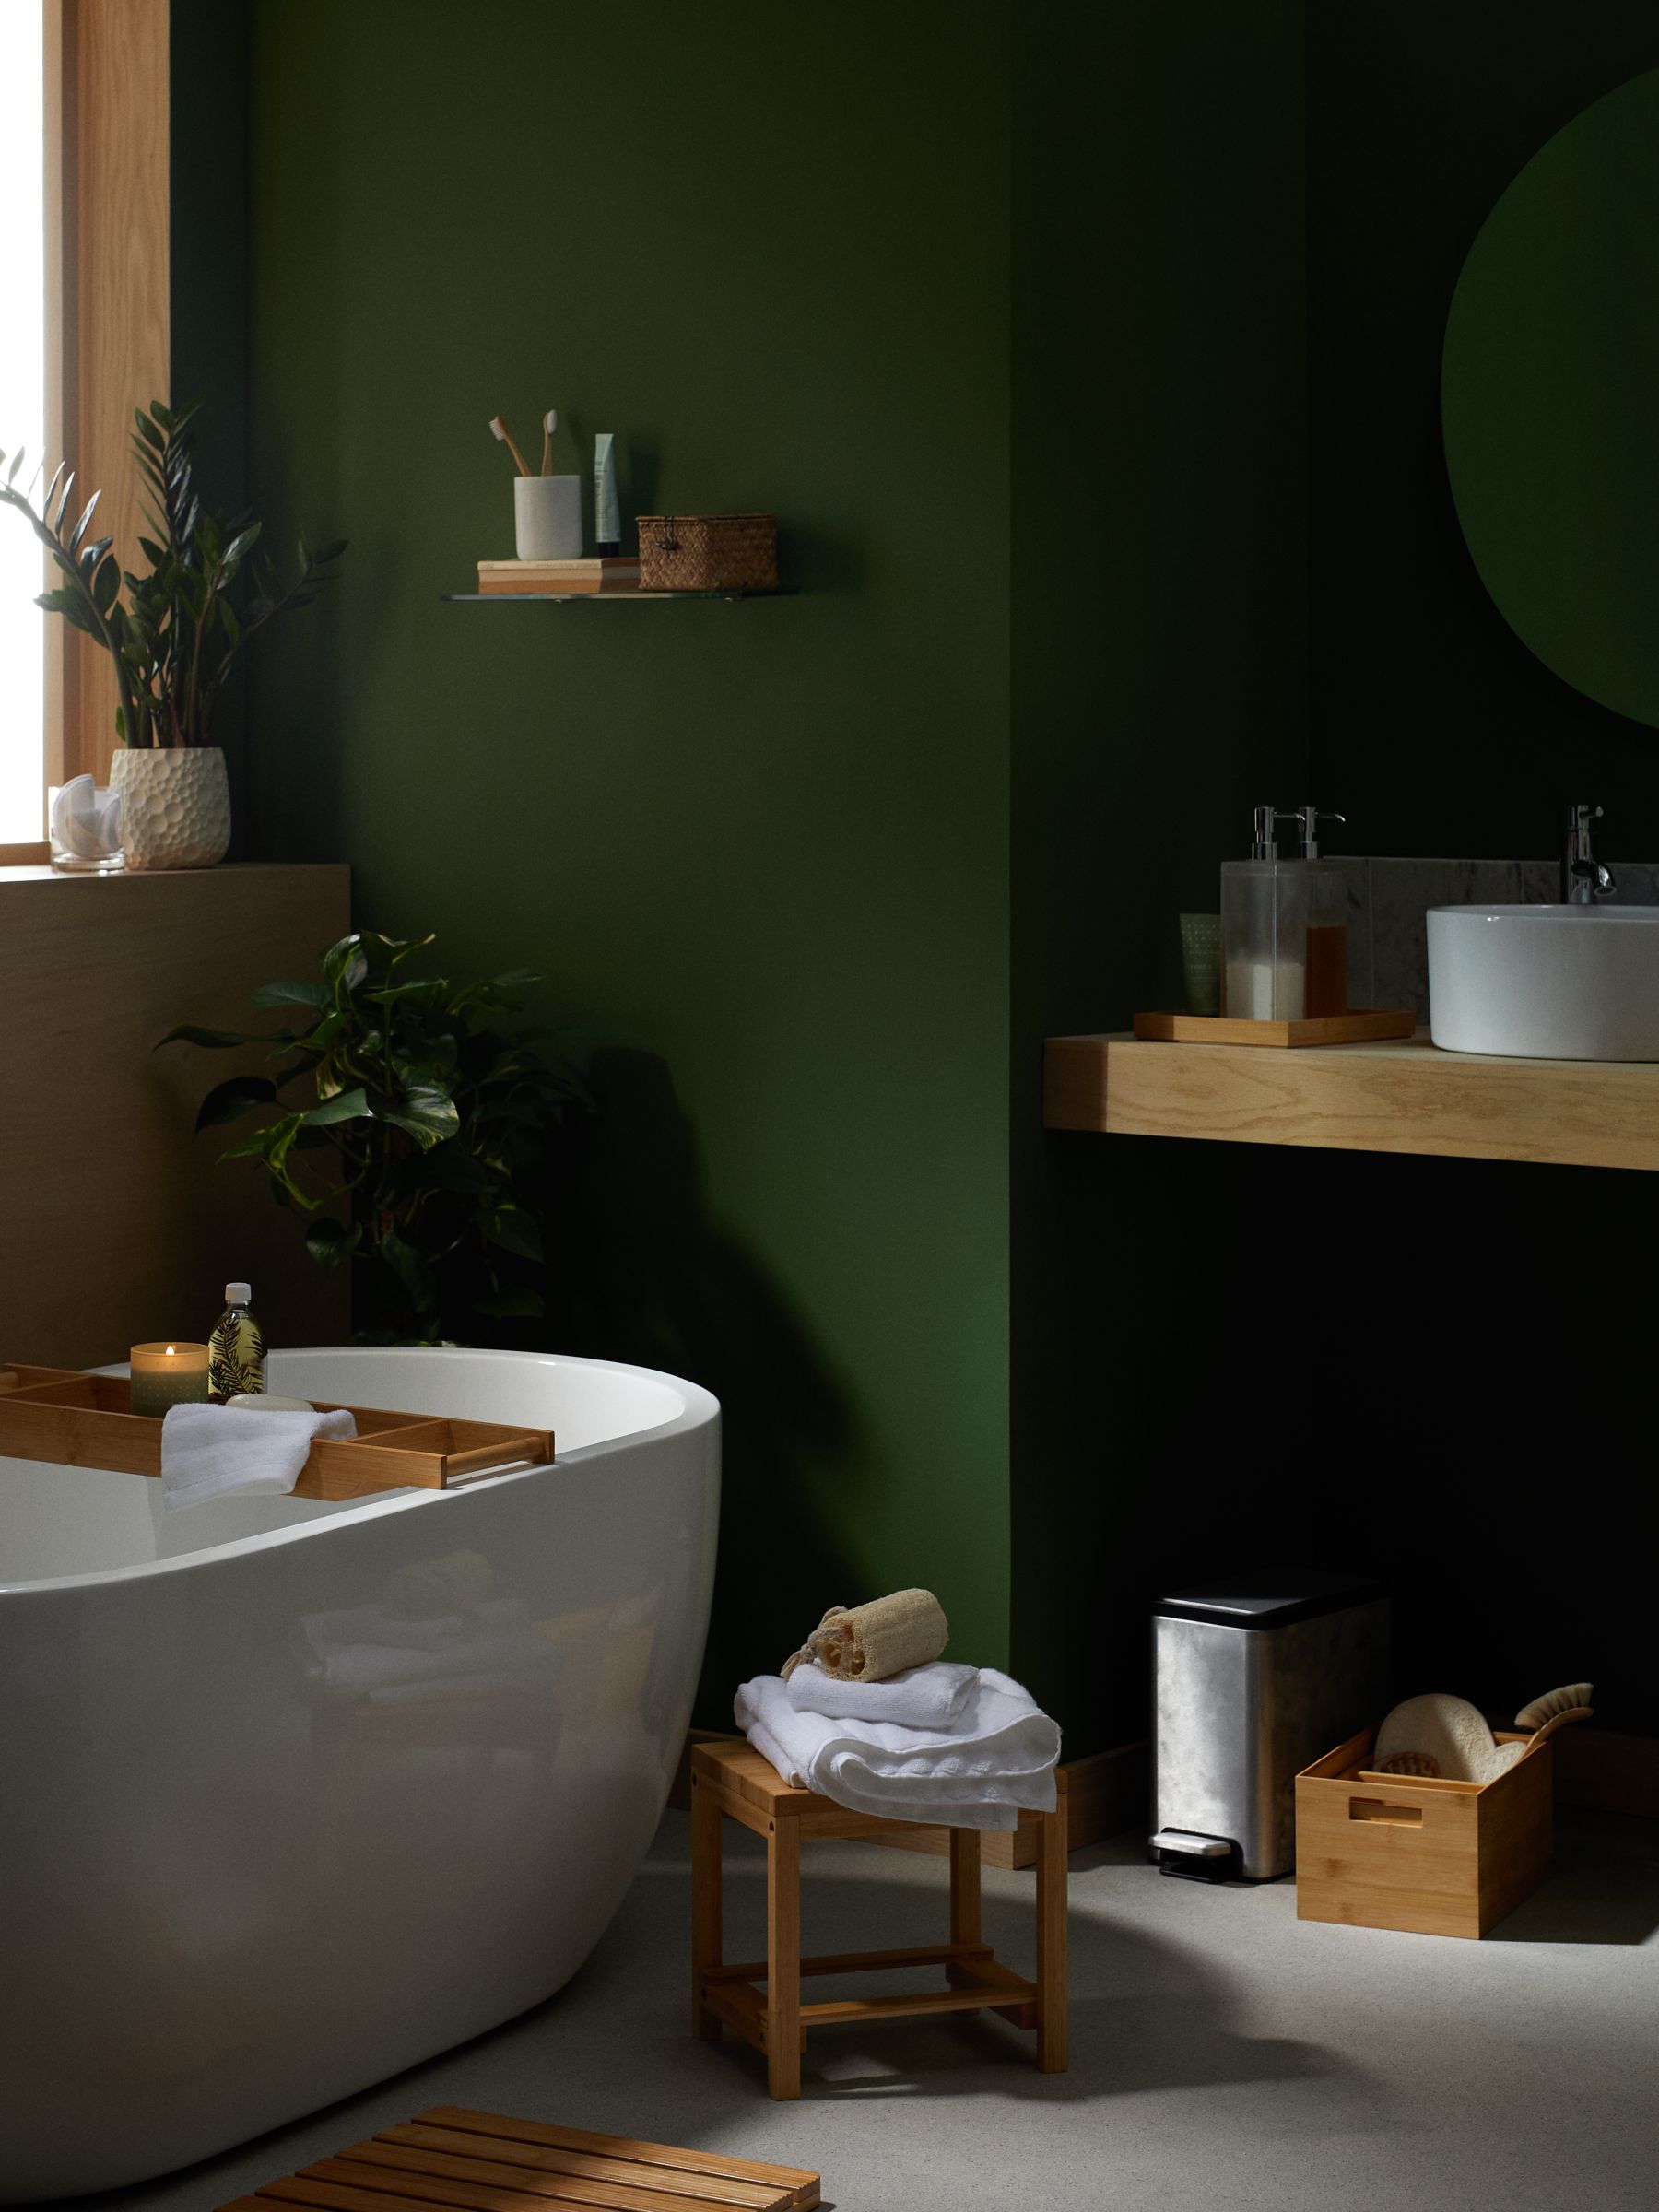 7 Big Bathroom Trends For 2023, According To The Experts